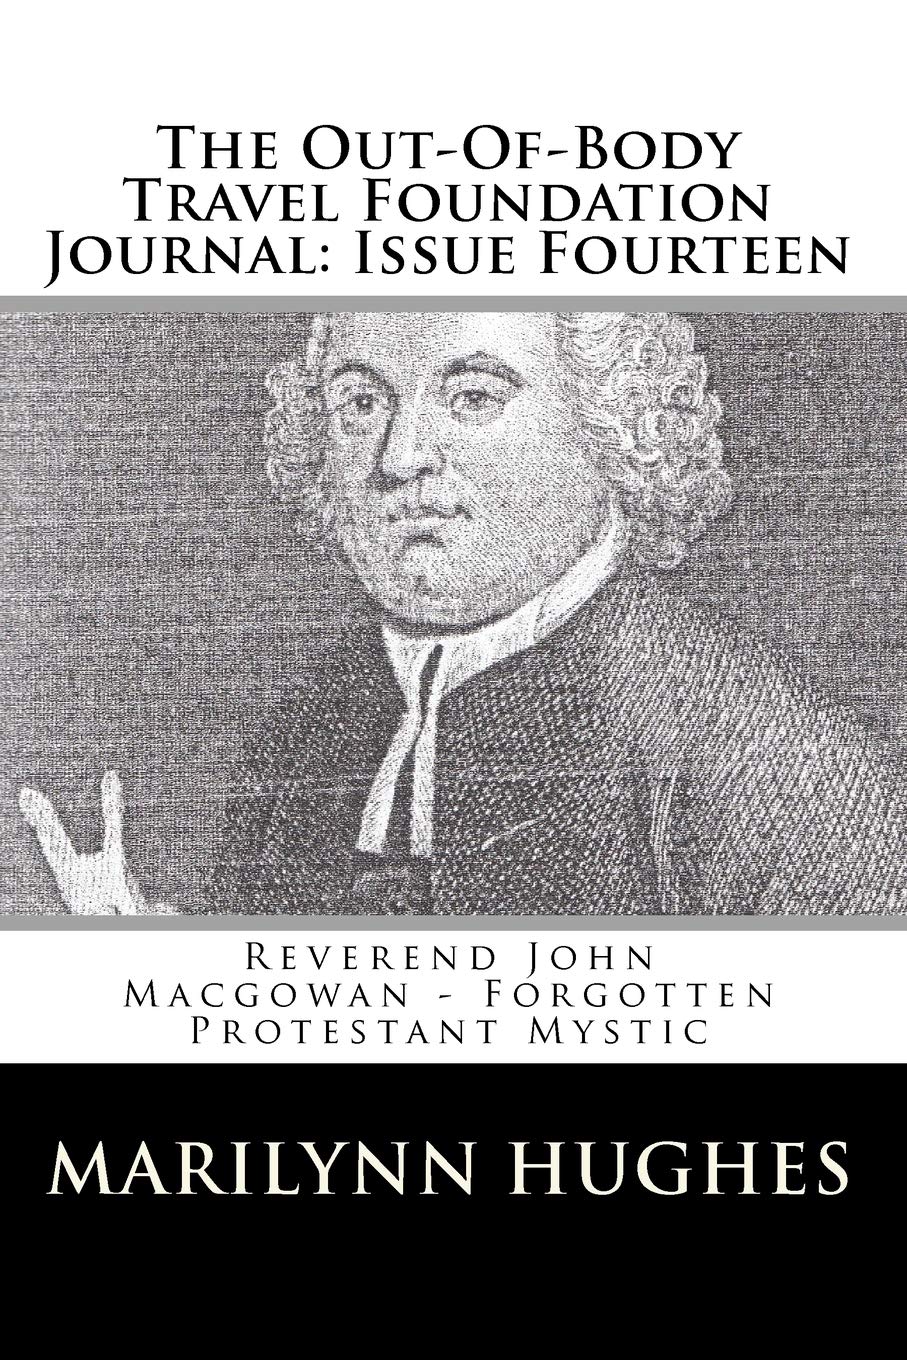 Reverend John Macgowan - Forgotten Protestant Mystic, Compiled and Edited by Marilynn Hughes